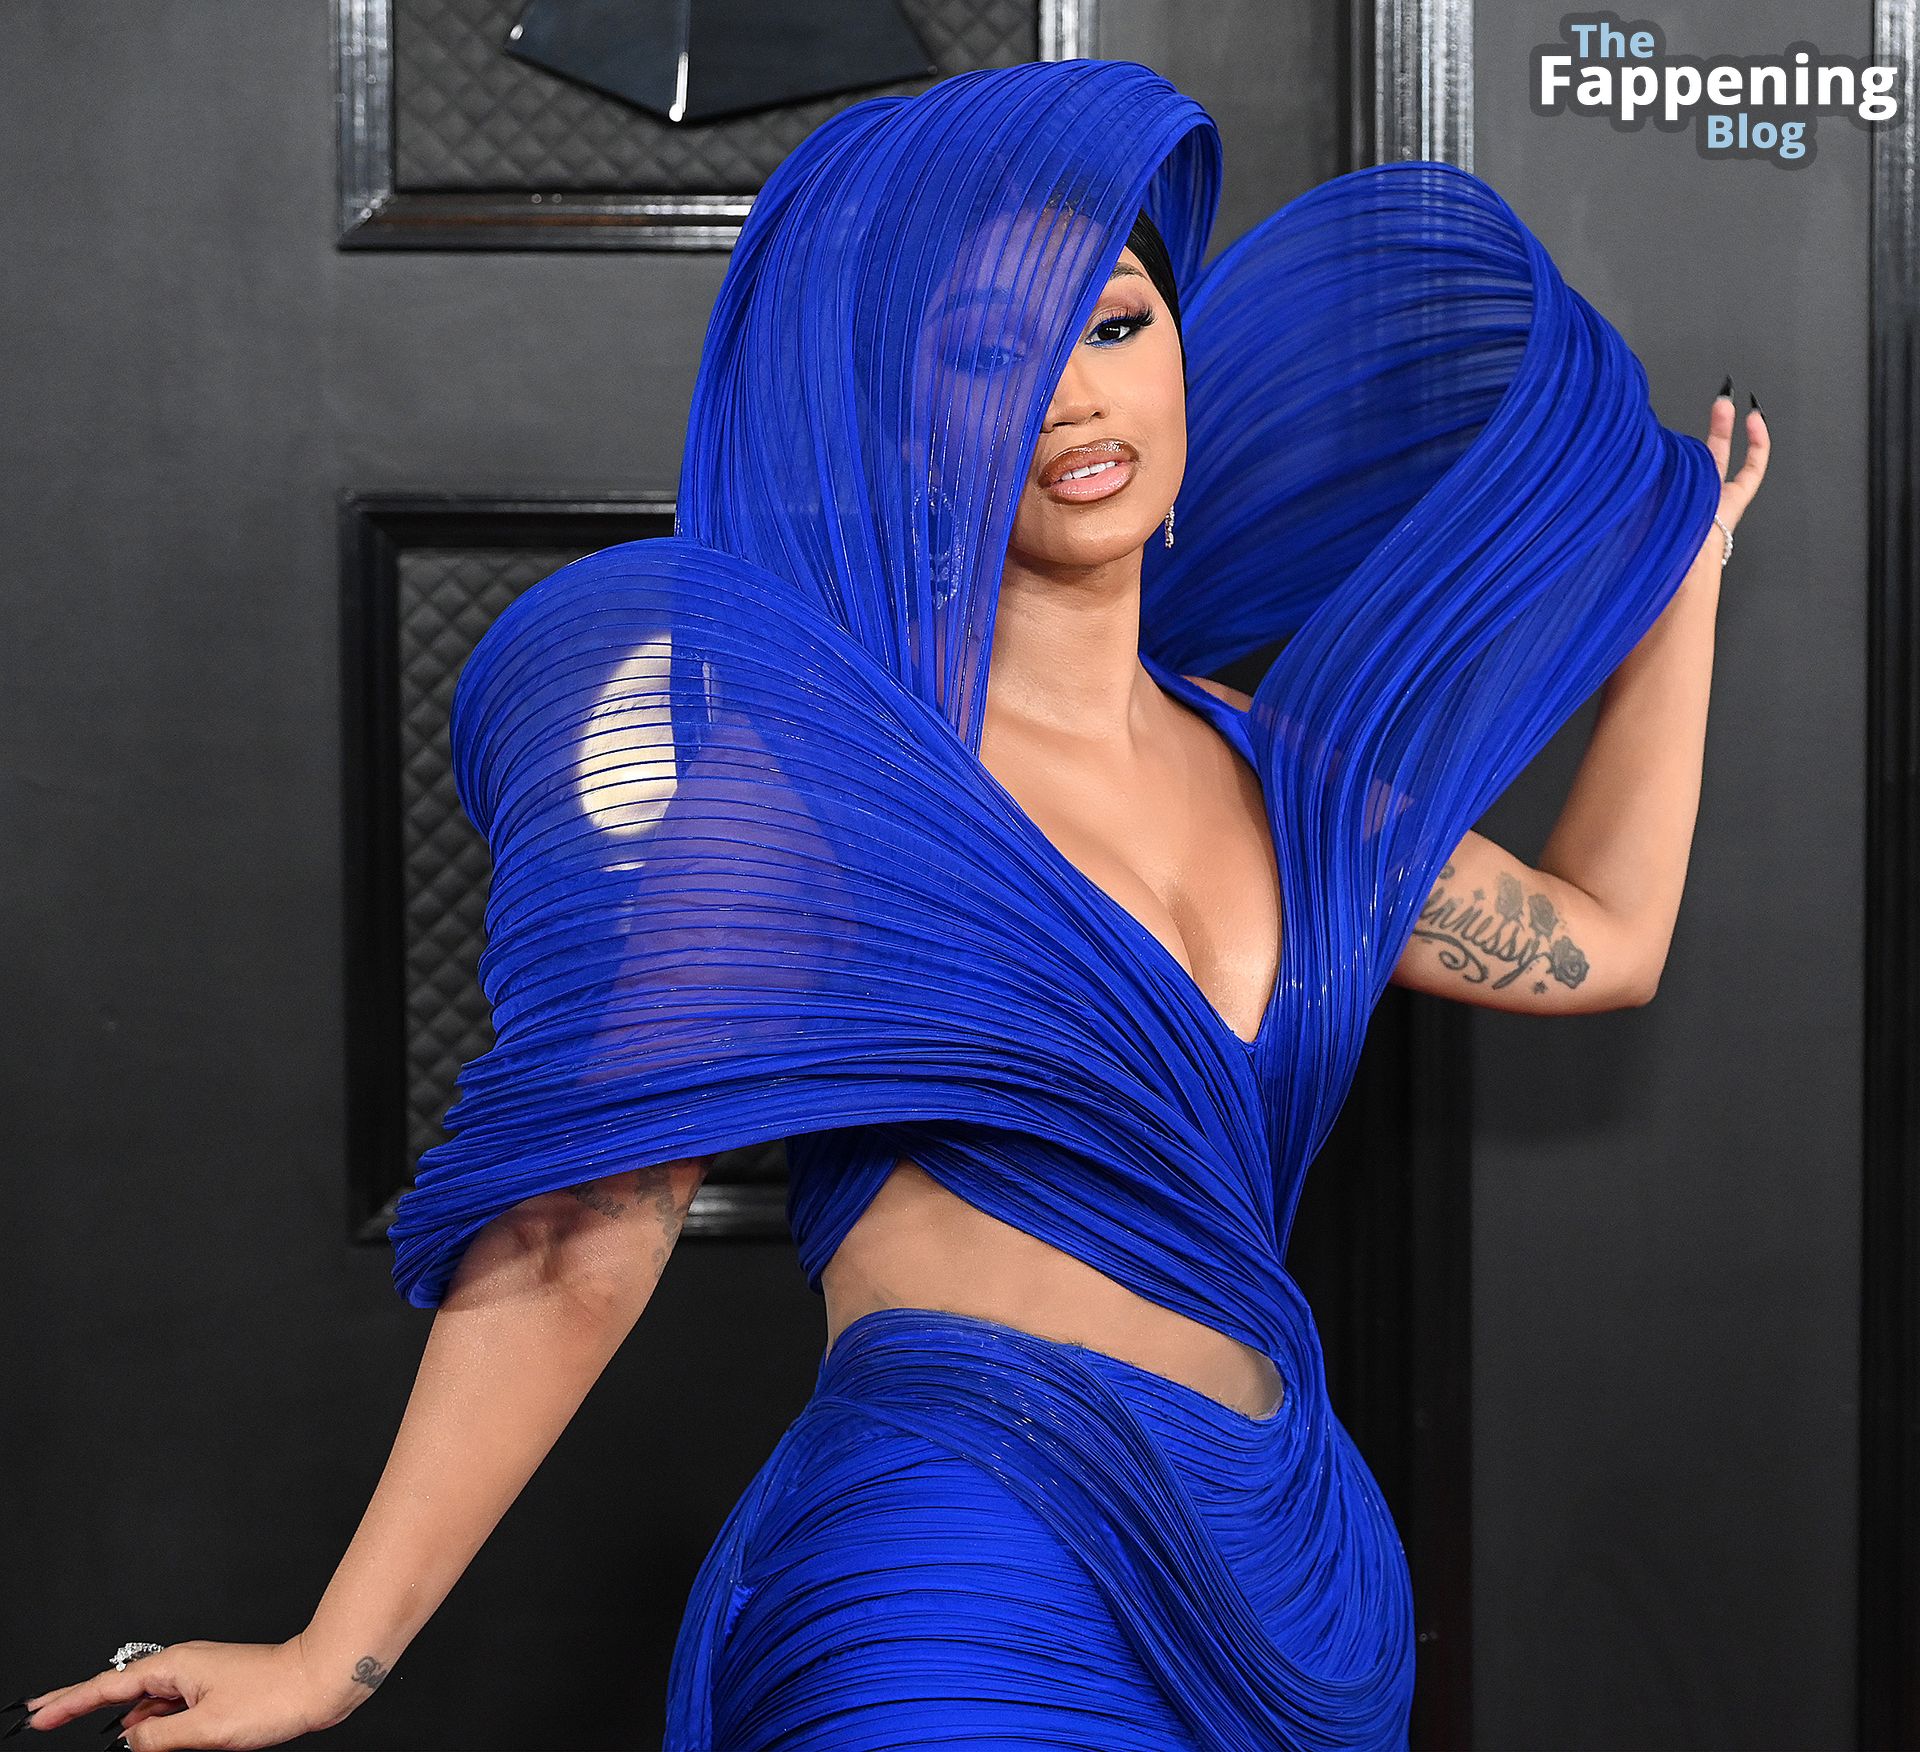 Cardi B Flaunts Her Sexy Boobs At The Th Annual Grammy Awards